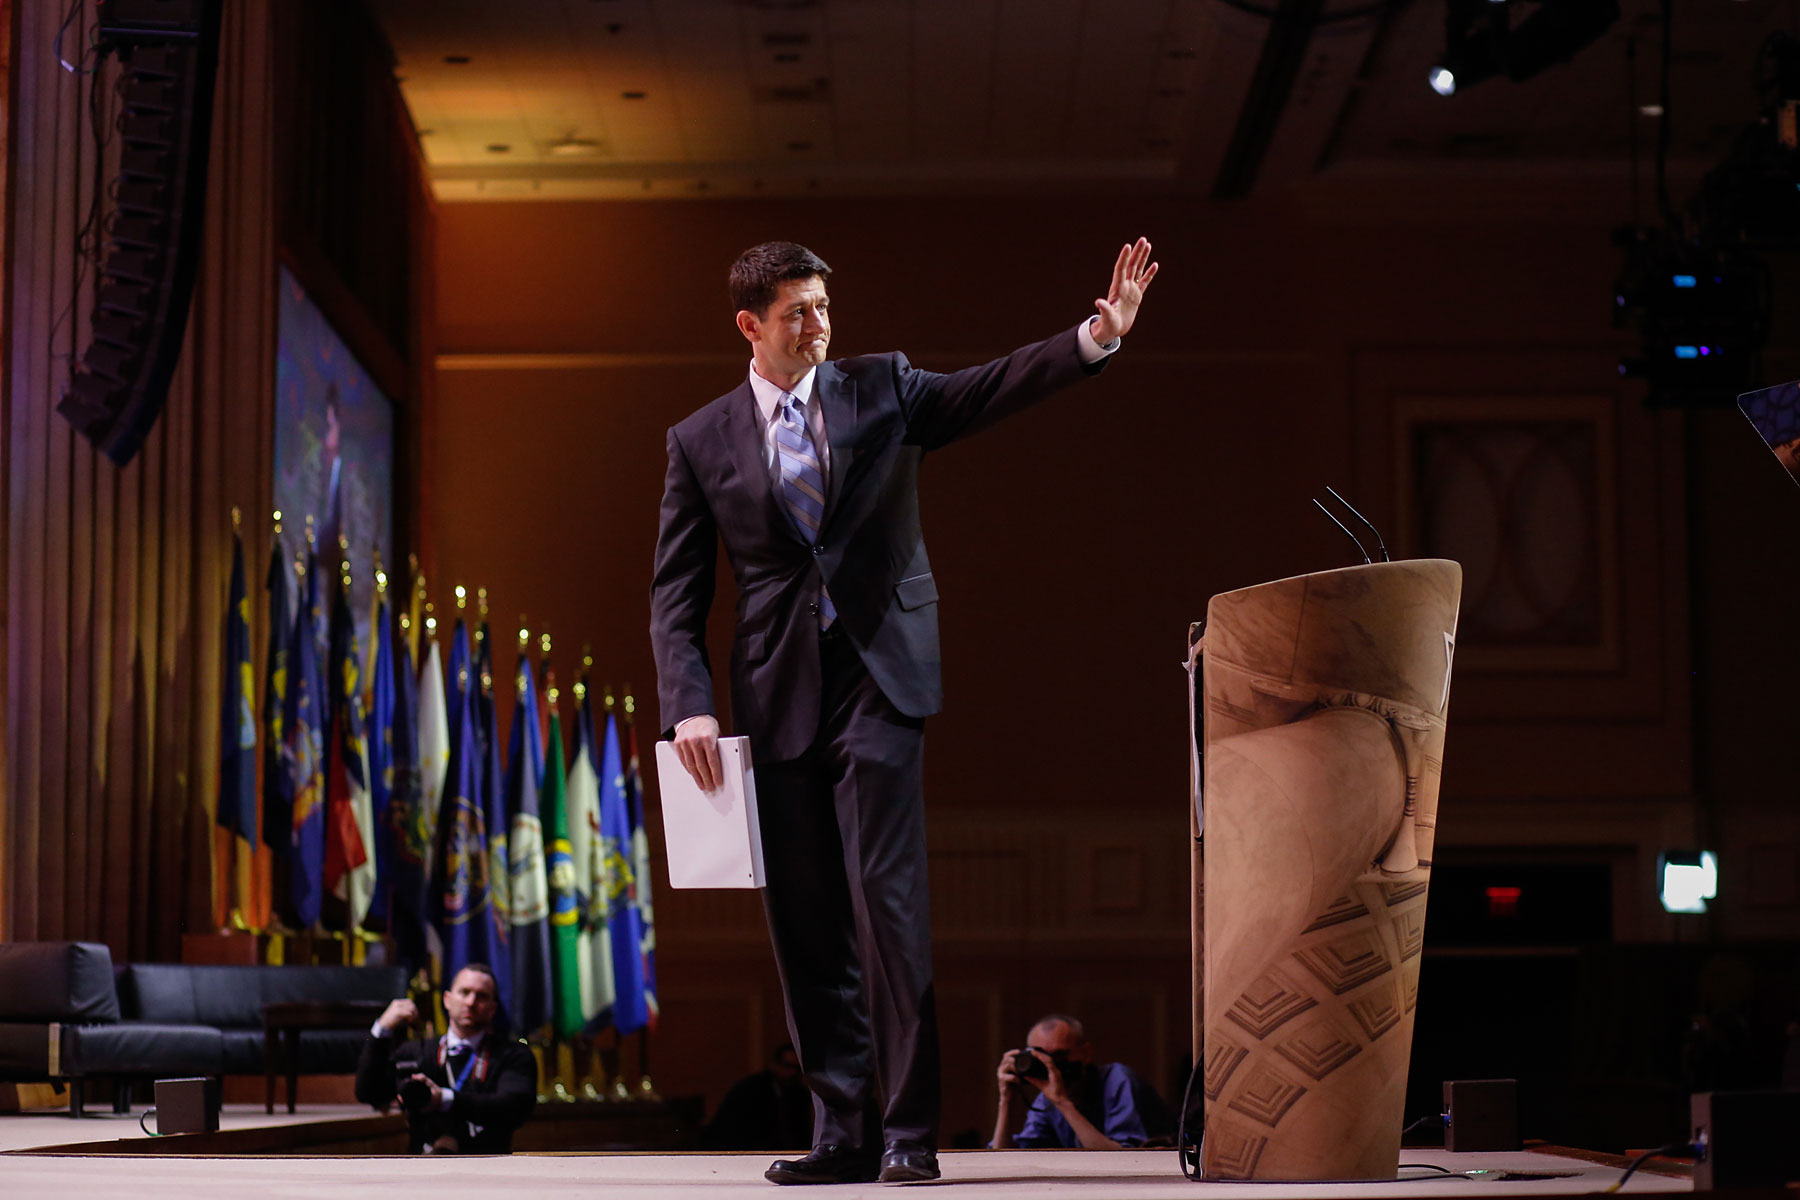 Congressman Paul Ryan, of Wisconsin, waves to the crowd after speaking during the Conservative Political Action Conference at the Gaylord National Resort & Convention Center in National Harbor, Md., March 6, 2014.